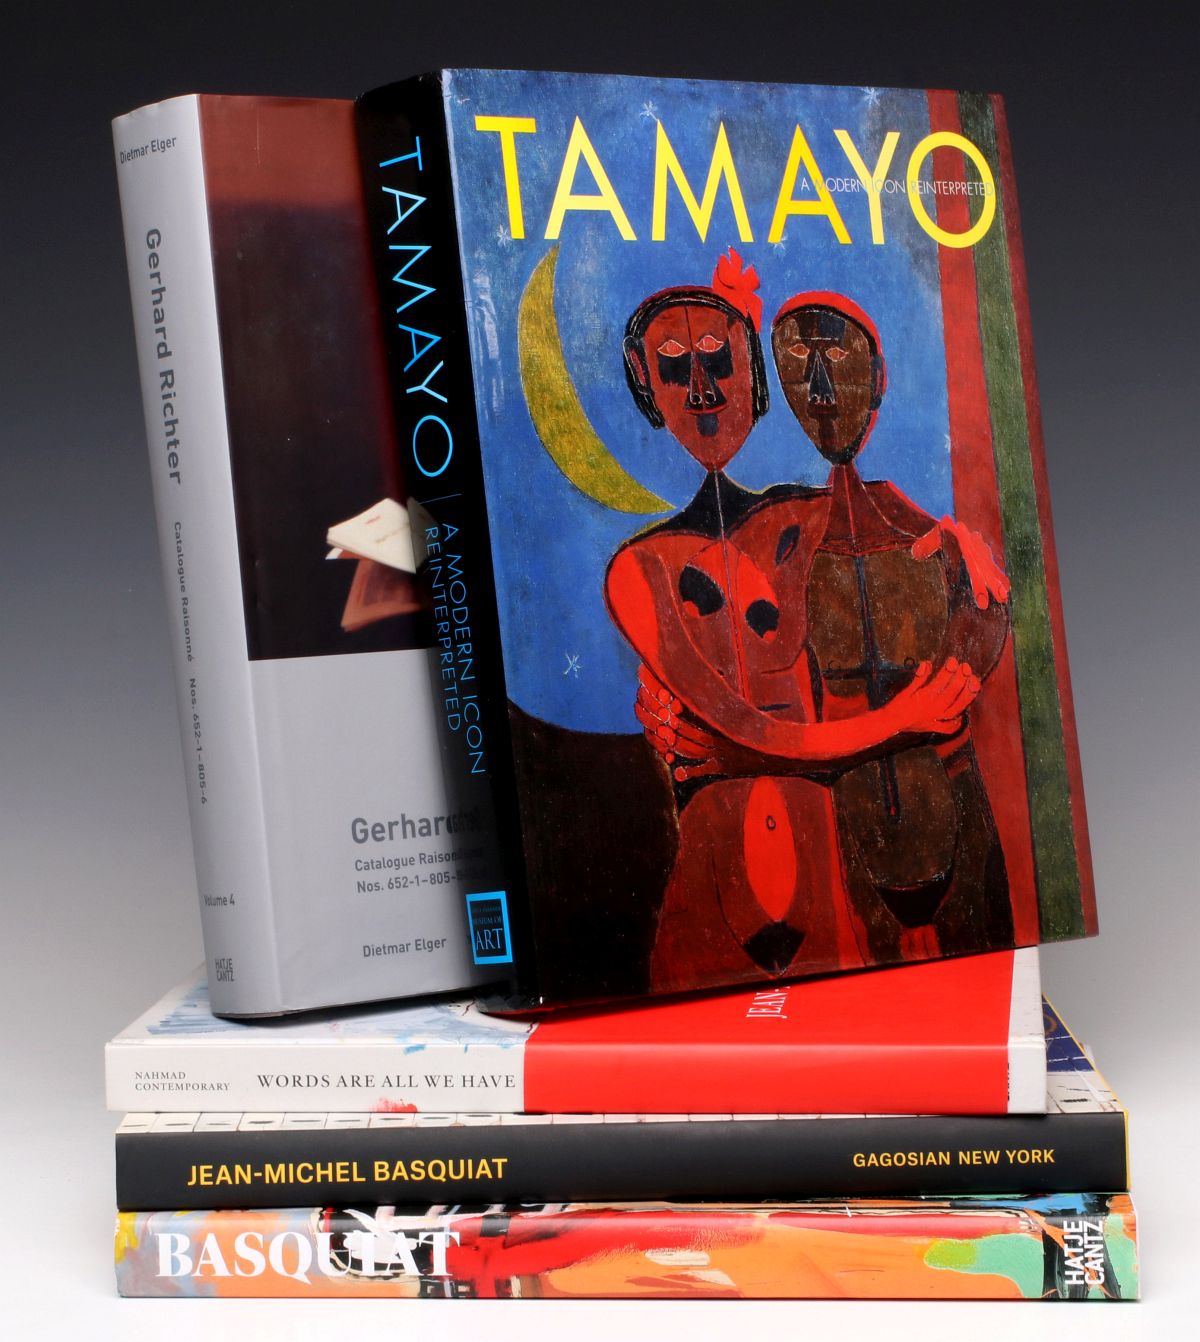 JEAN-MICHEL BASQUIAT AND OTHER ILLUSTRATED BOOKS